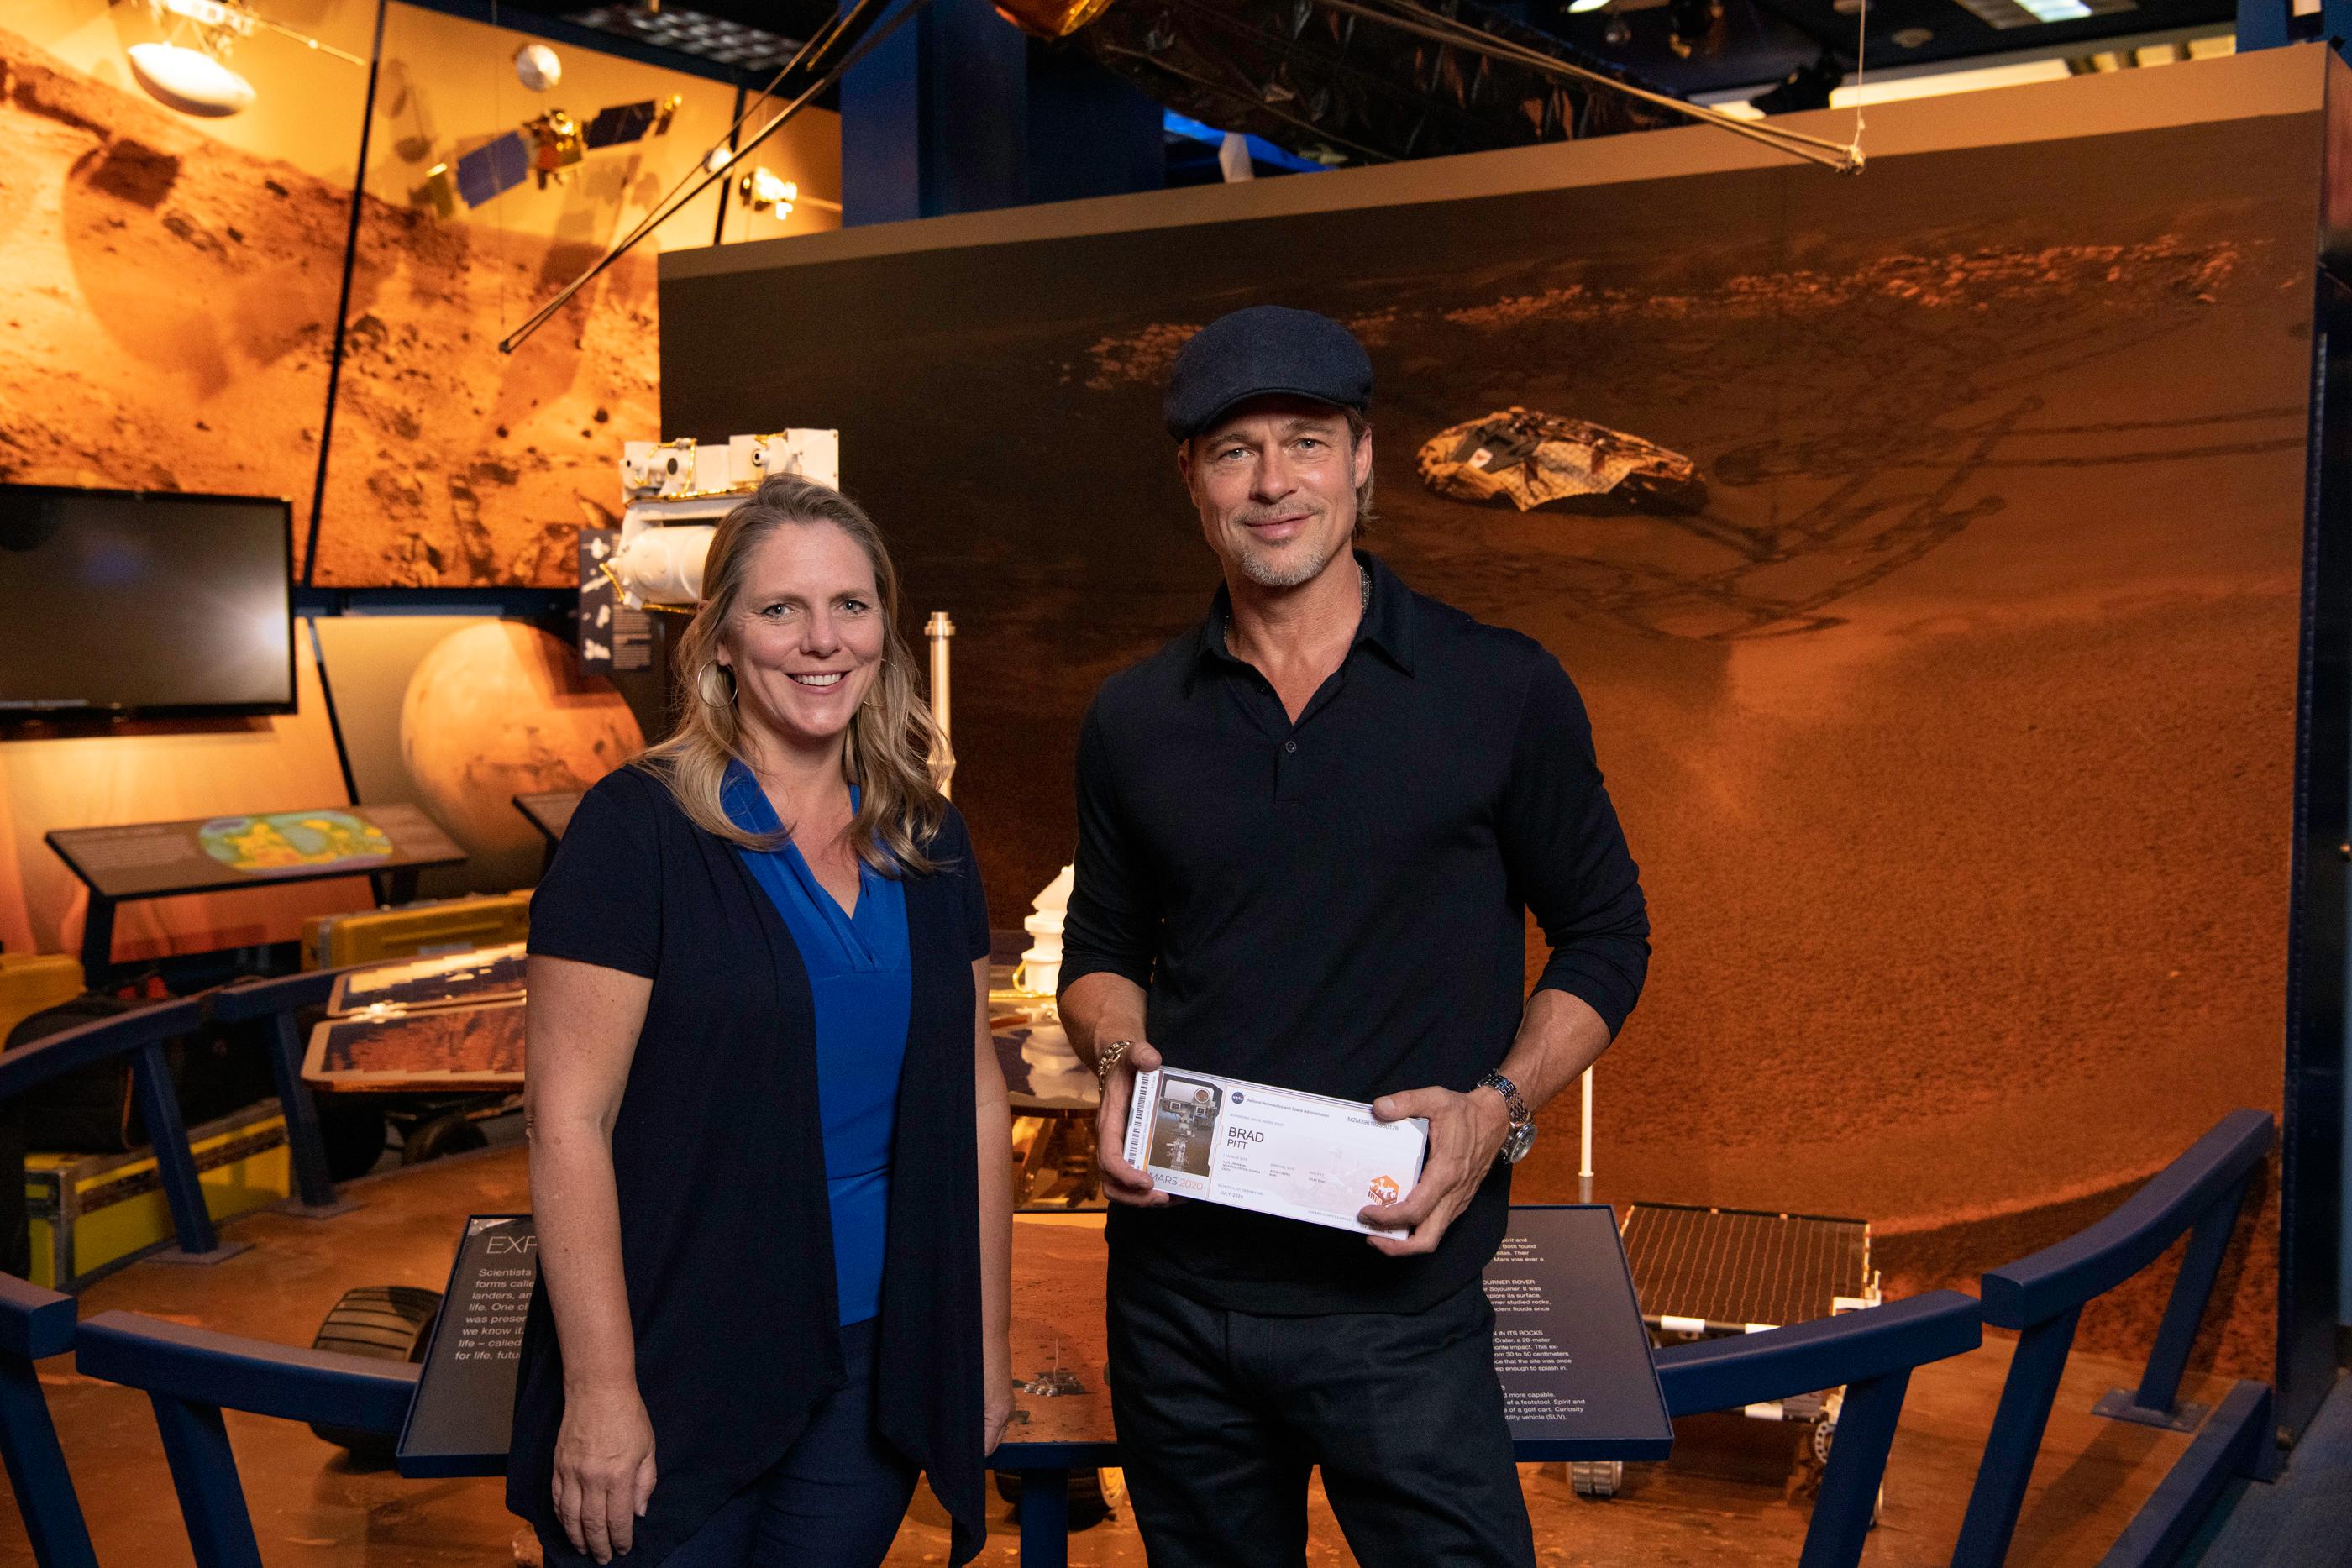 PIA23279: Send Your Name to Mars With Brad Pitt